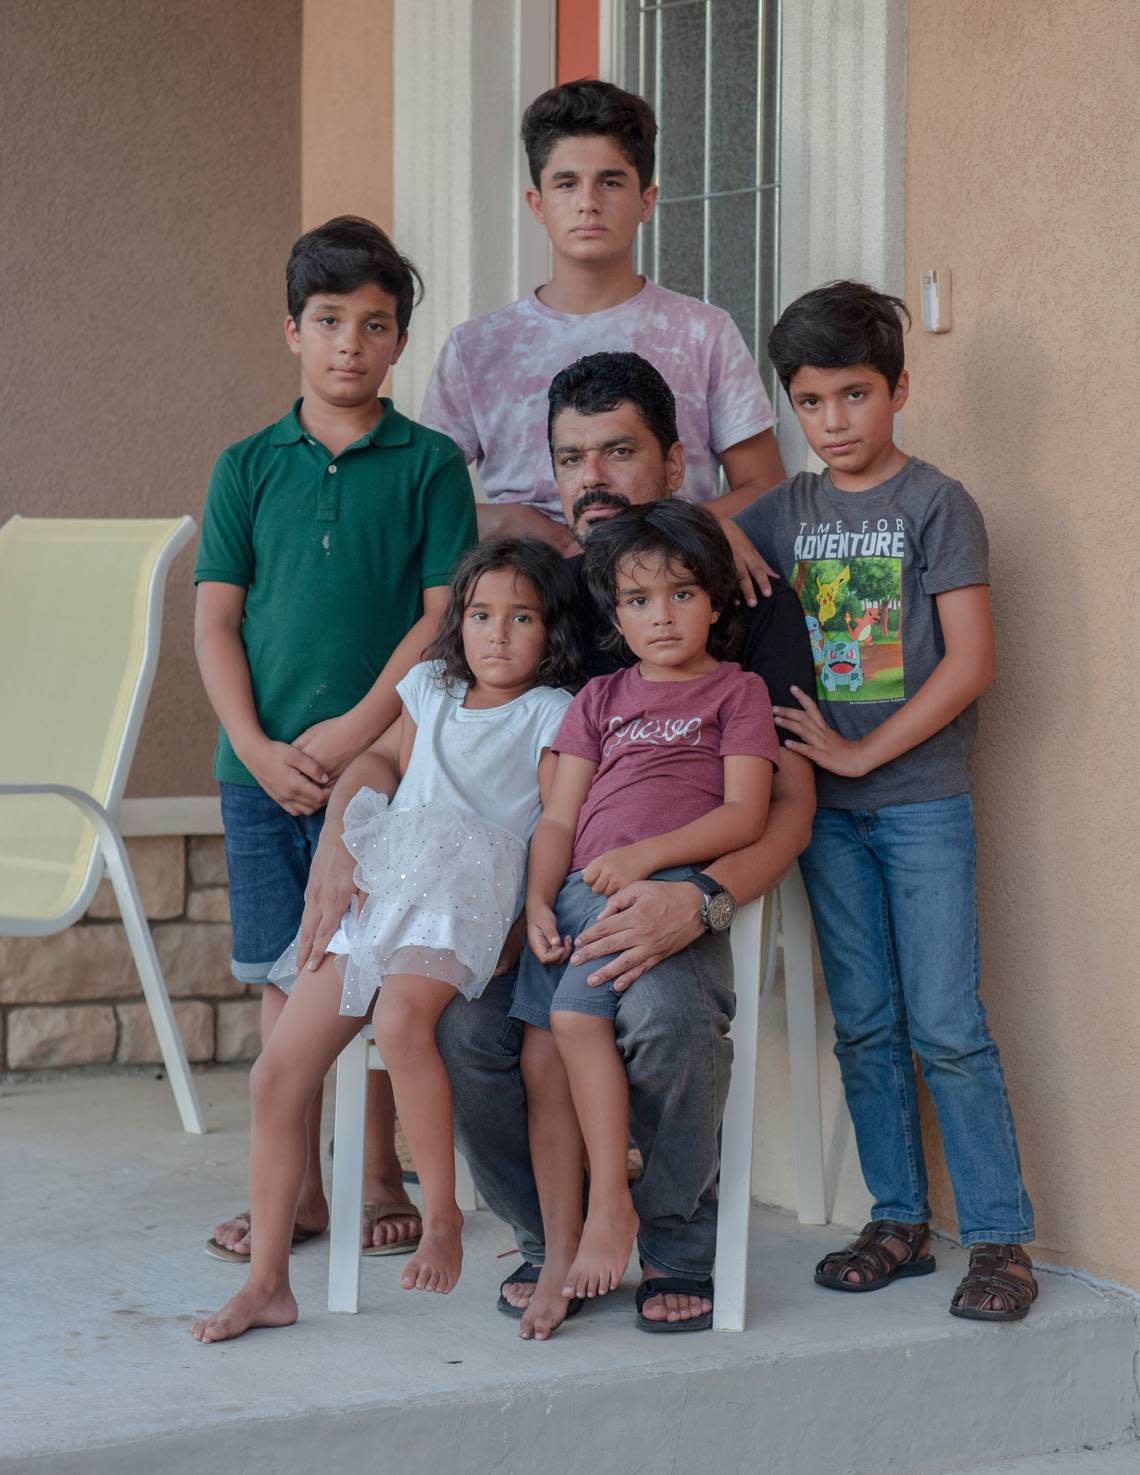 Rezwan’s father, Lemar, and the family’s other children at their home in Missouri.